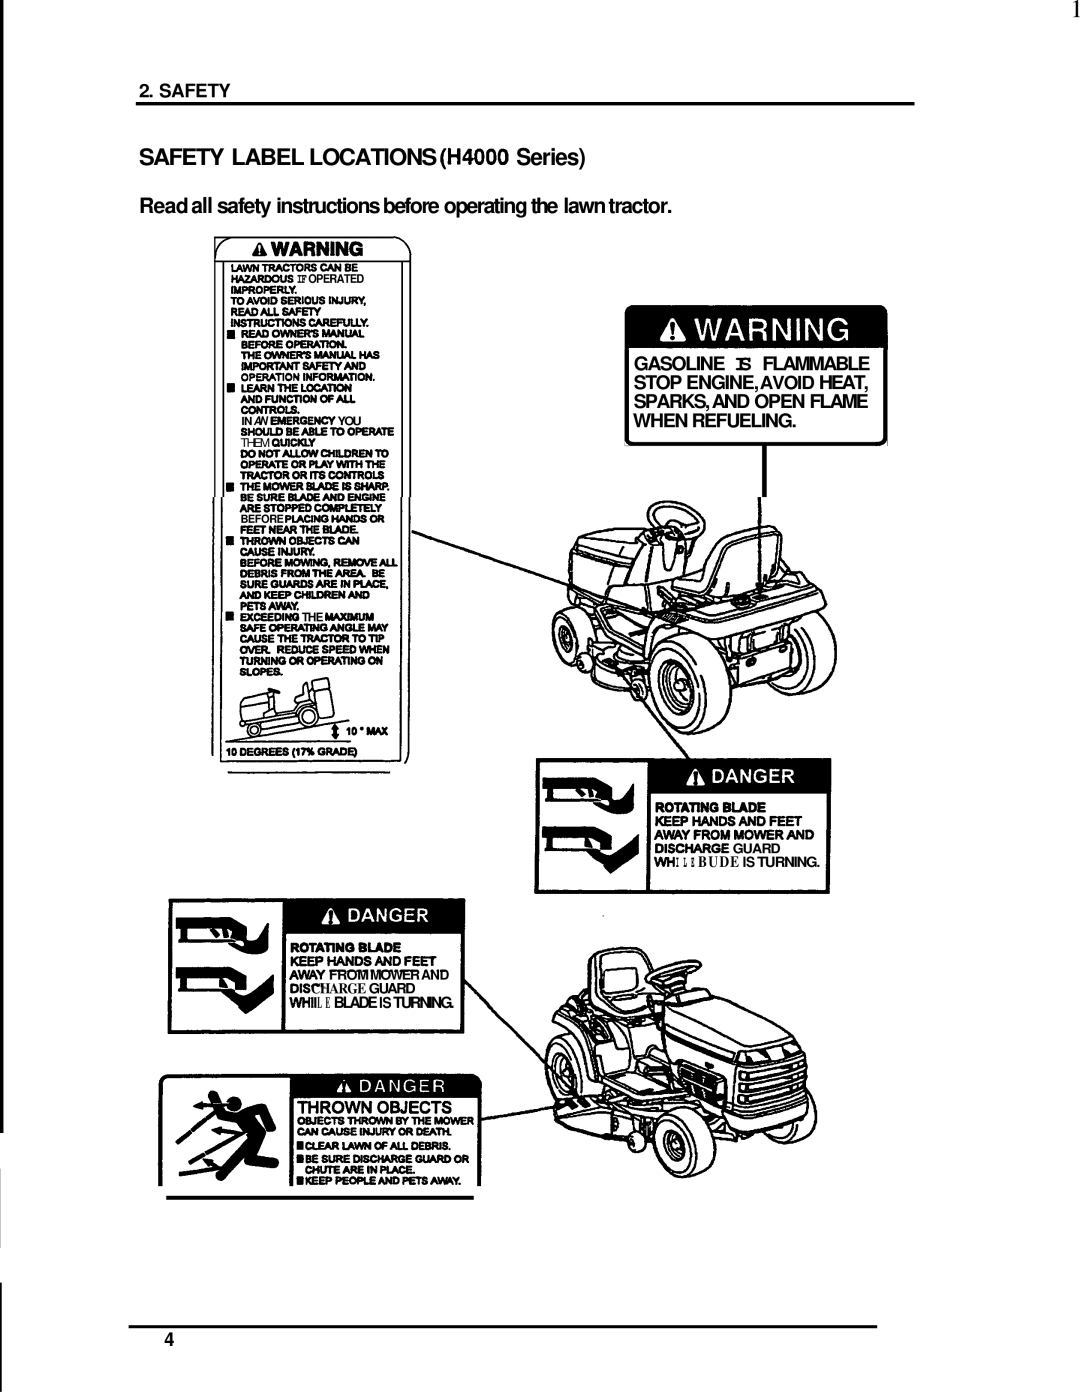 Honda Power Equipment H2000 SAFETY LABEL LOCATIONS HMO0 Series, f AWARNING, Safety, Sparks,And Open Flame When Refueling 